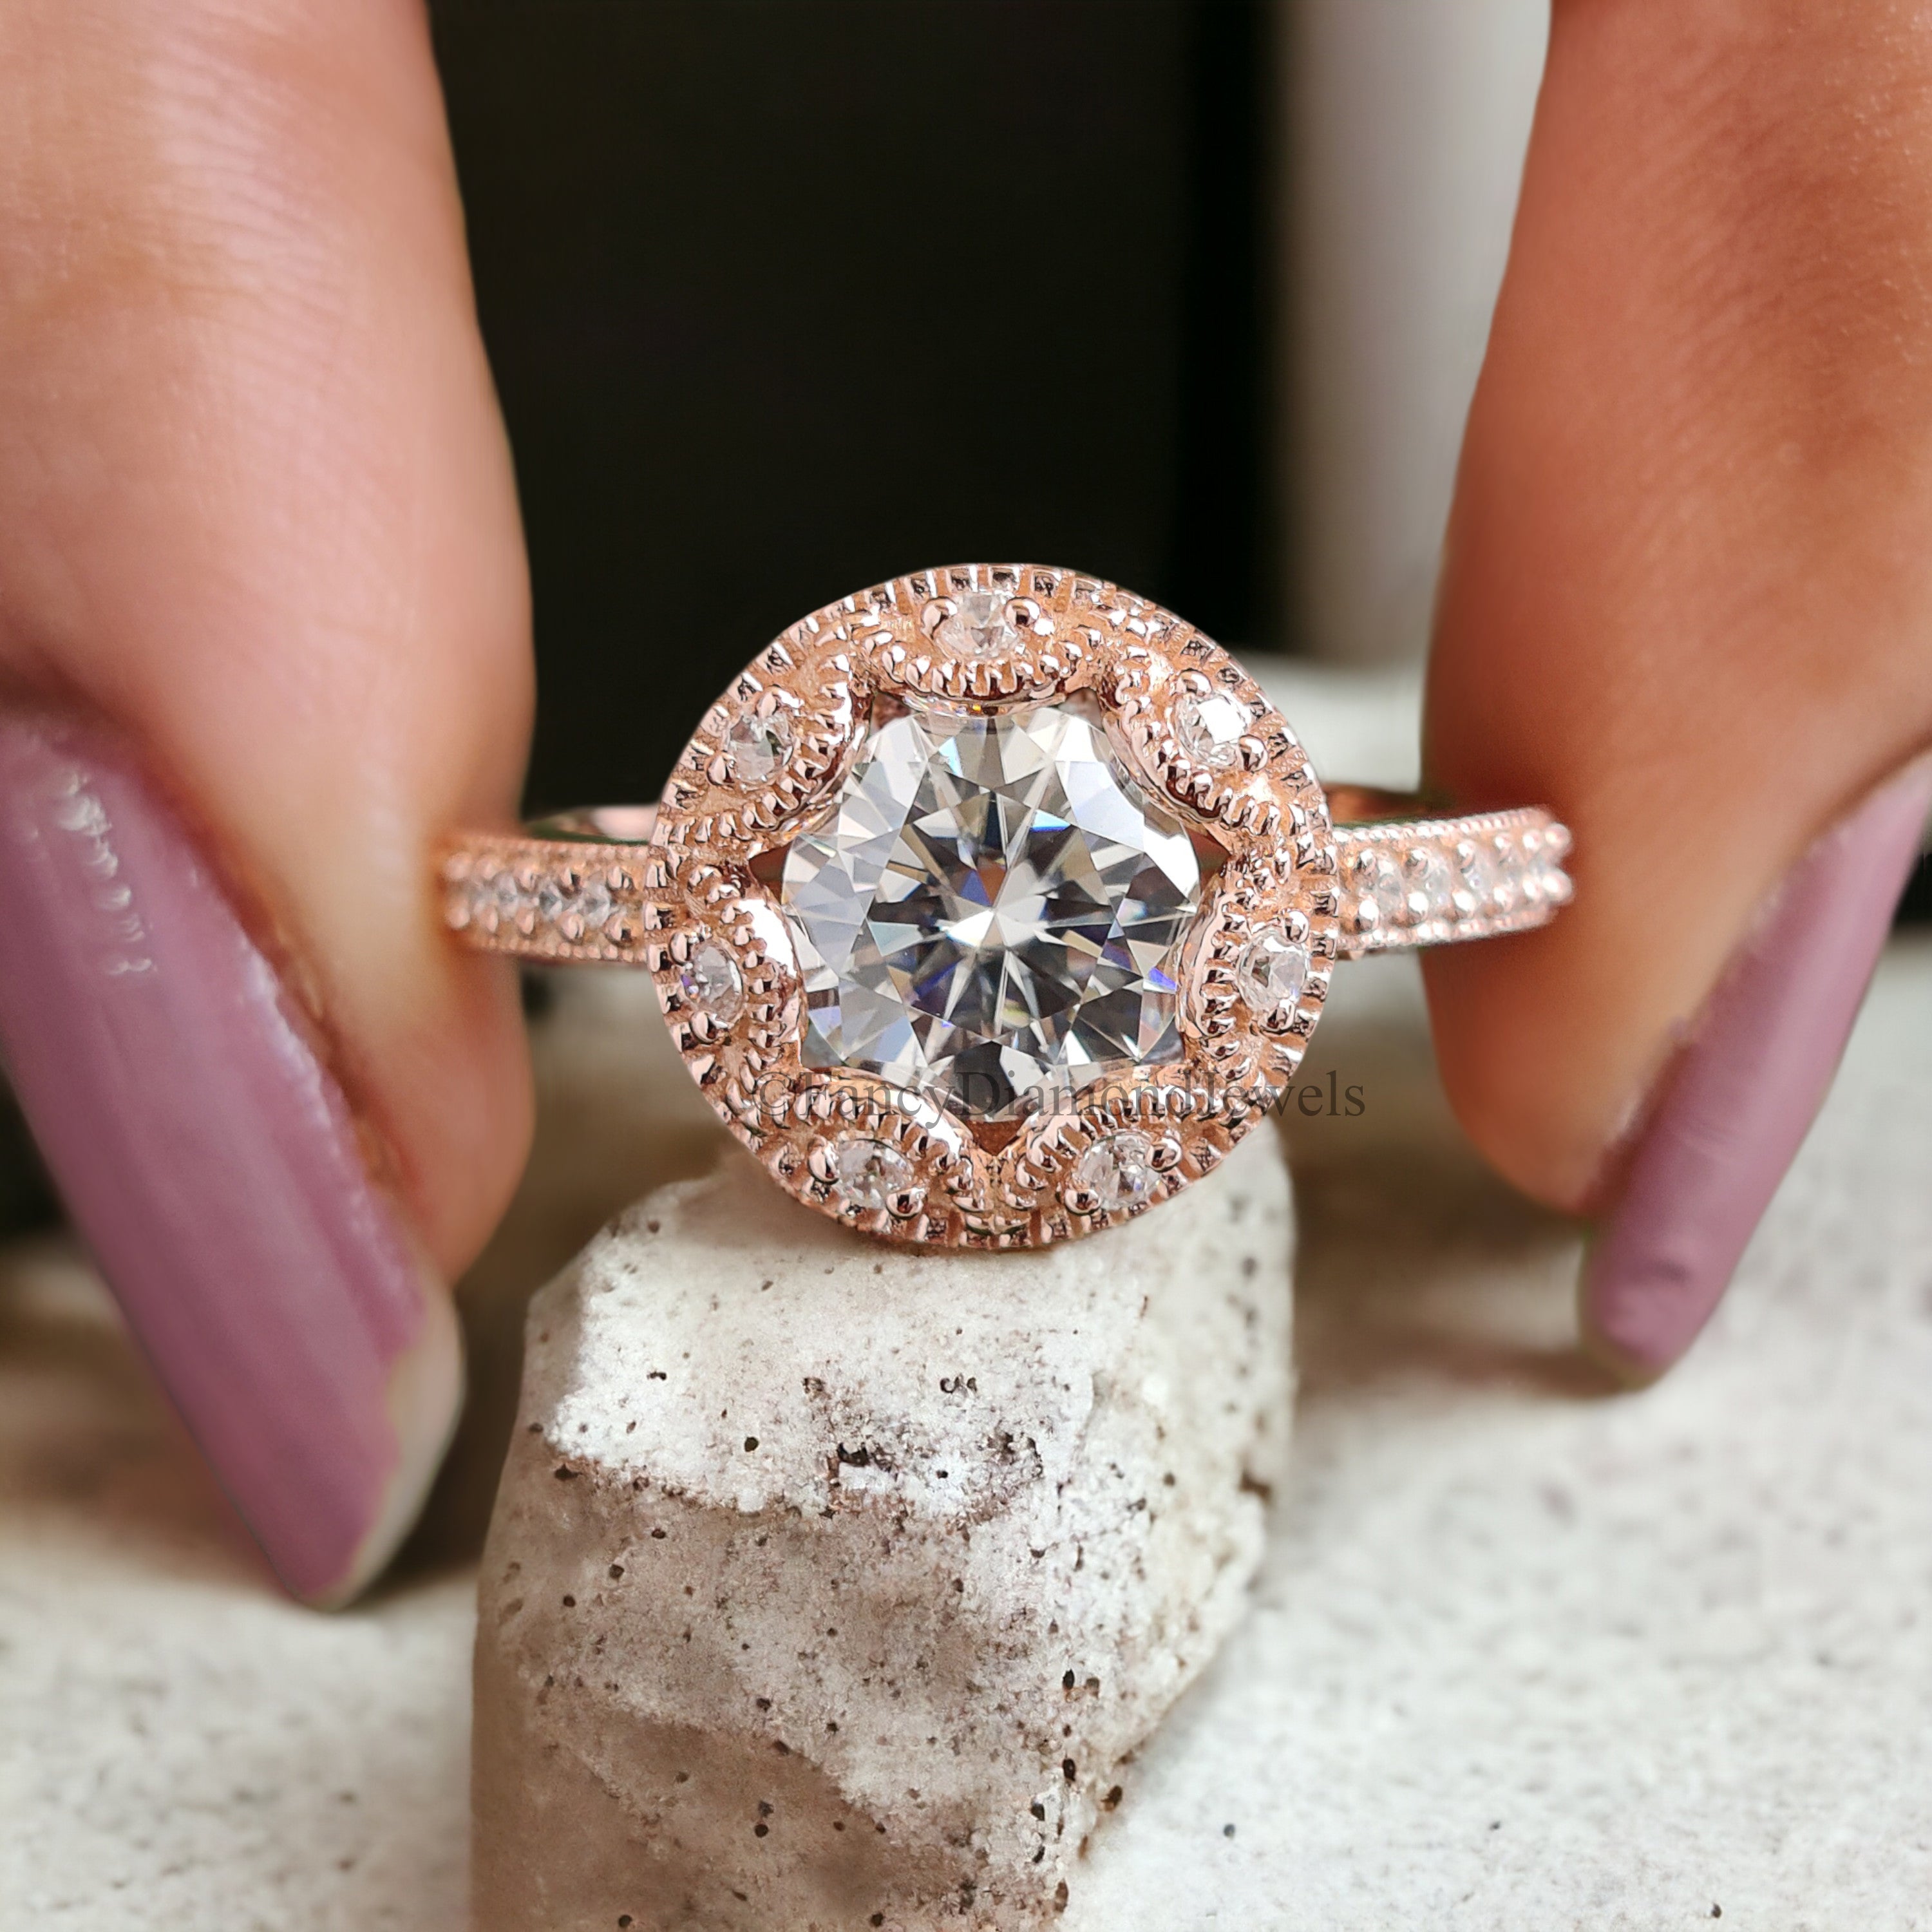 Round Cut Moissanite Engagement Ring Halo Milgrain Engagement Ring Handmade Jewelry Rose Gold Wedding Ring Surprise Gifts for Her FD166